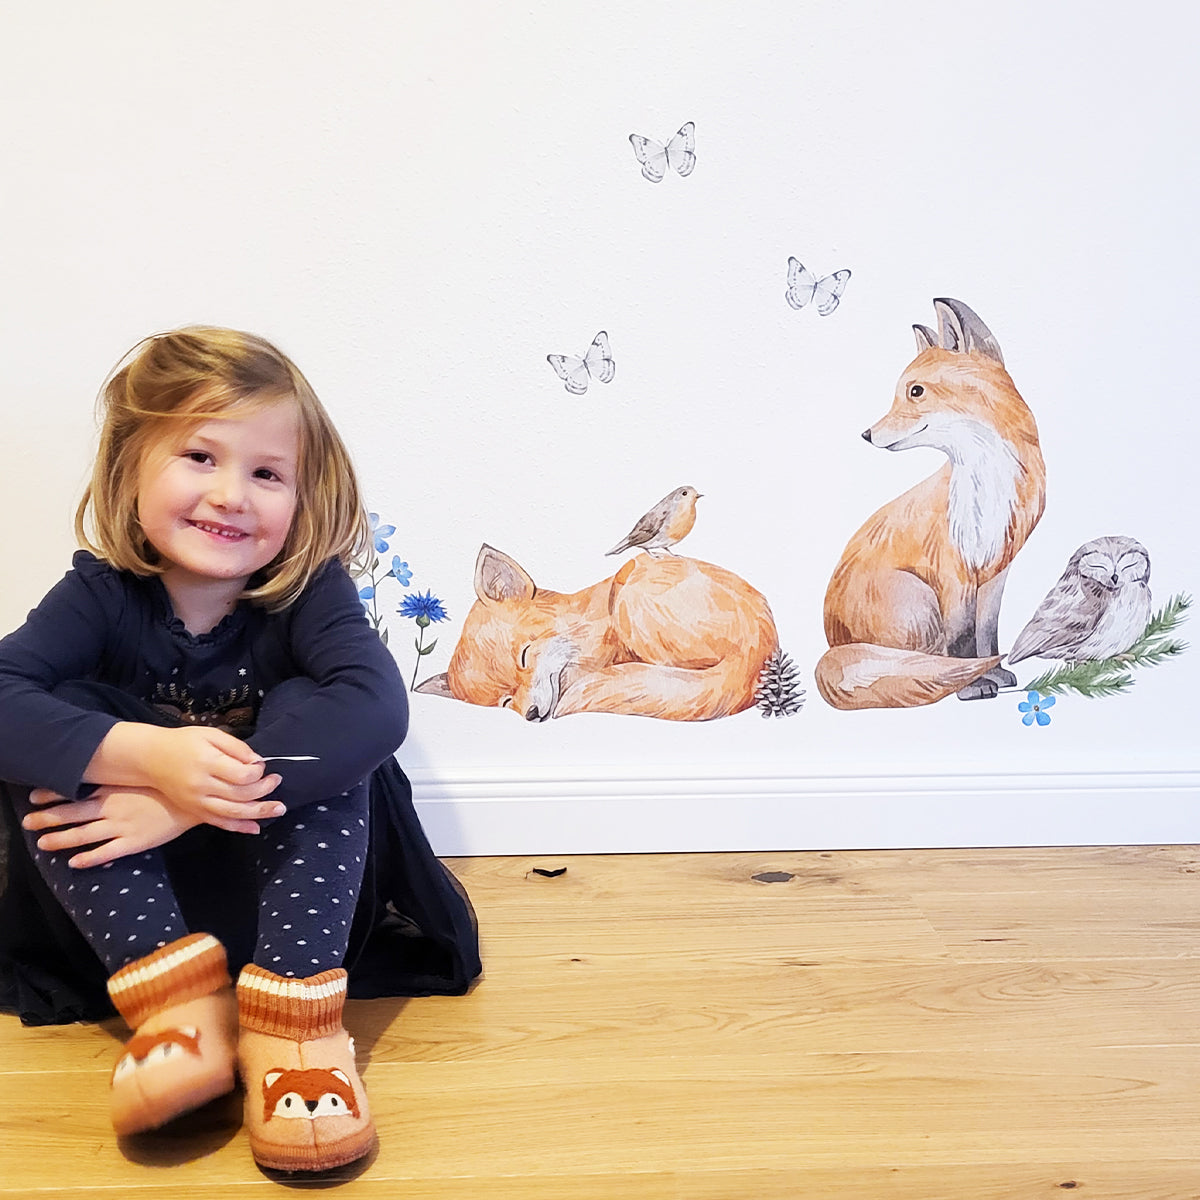 Woodland wall stickers - Magical forest - foxes